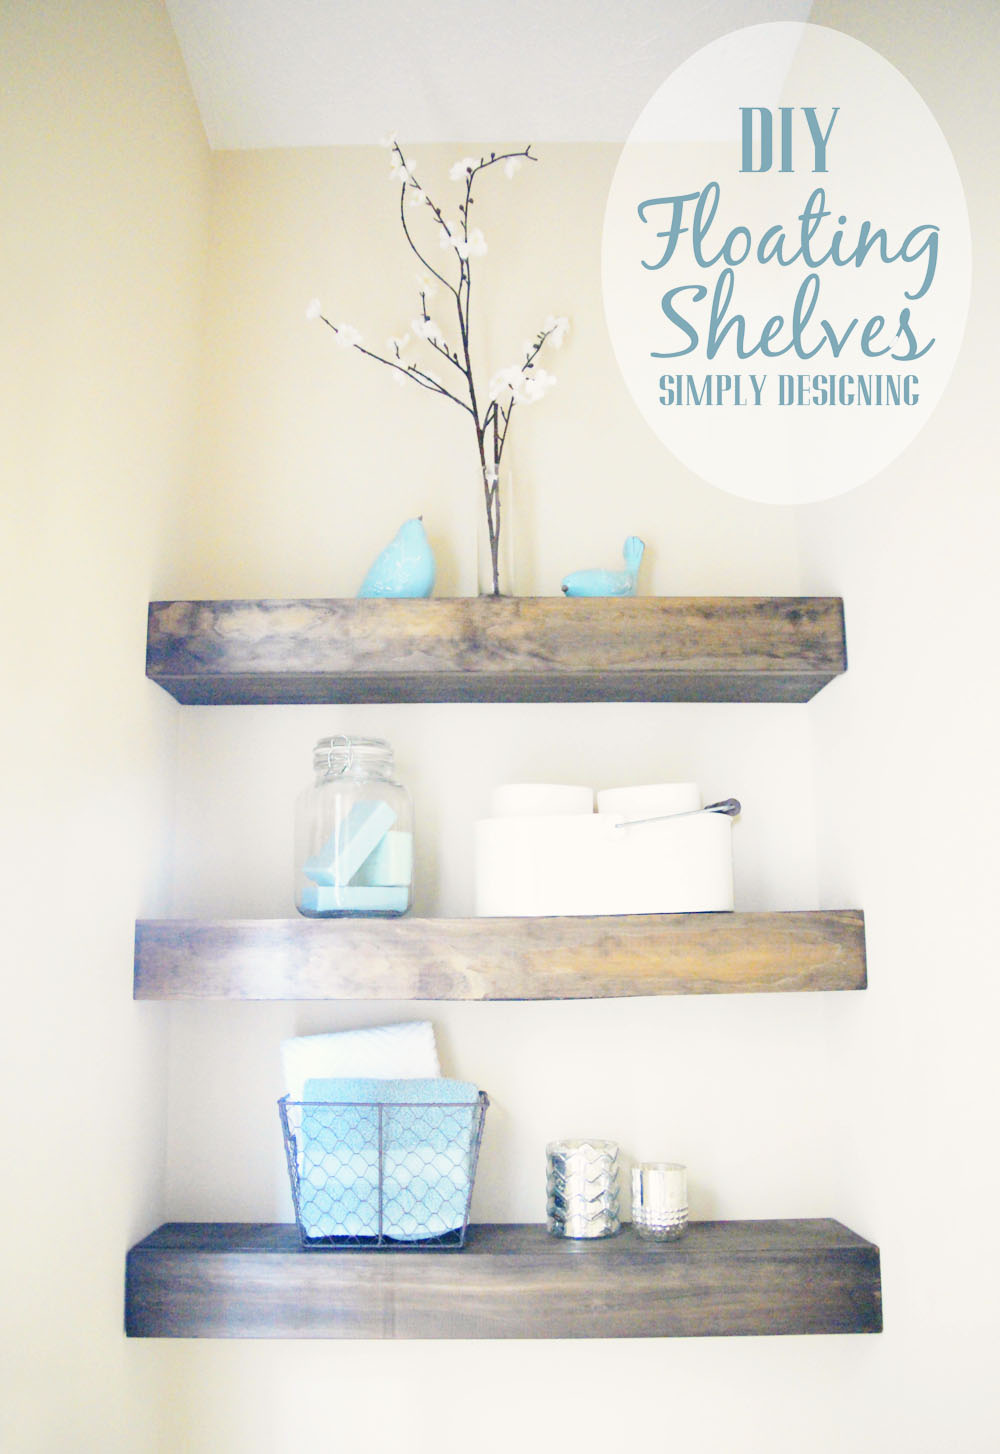 DIY Floating Shelves how to build floating shelves - these make a 